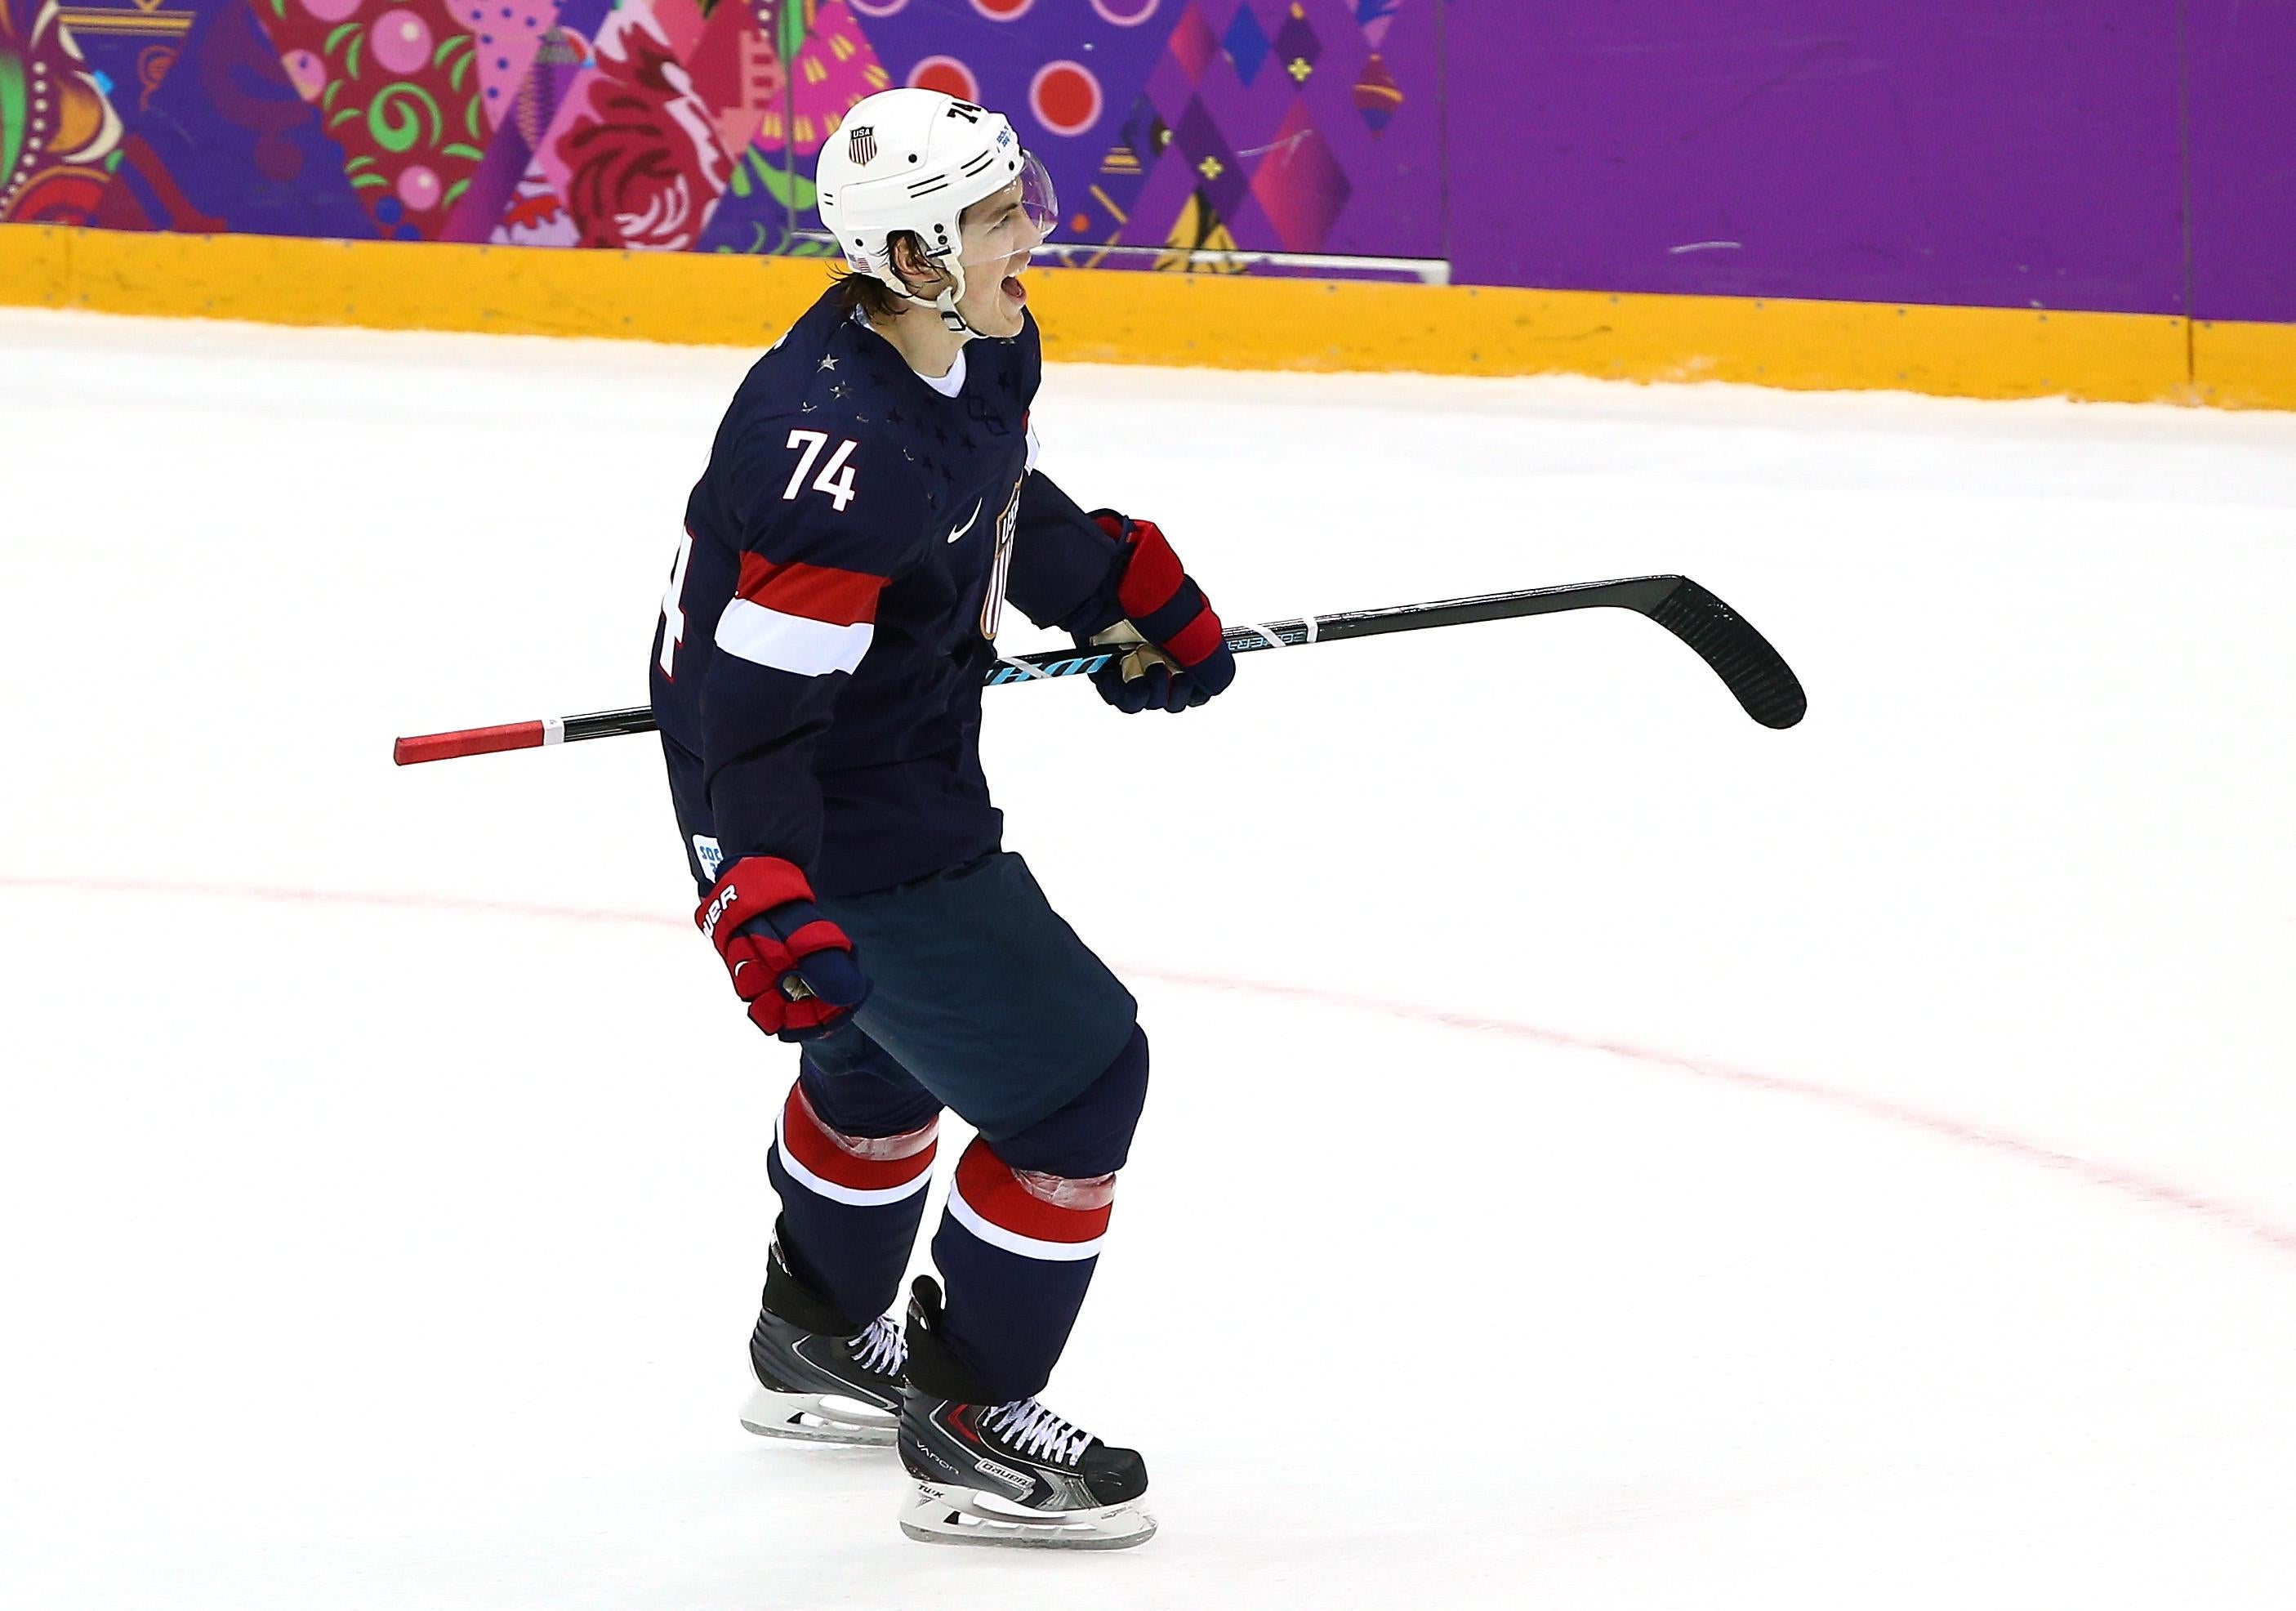 T.J. Oshie leads Team USA to dramatic shootout win over Russia